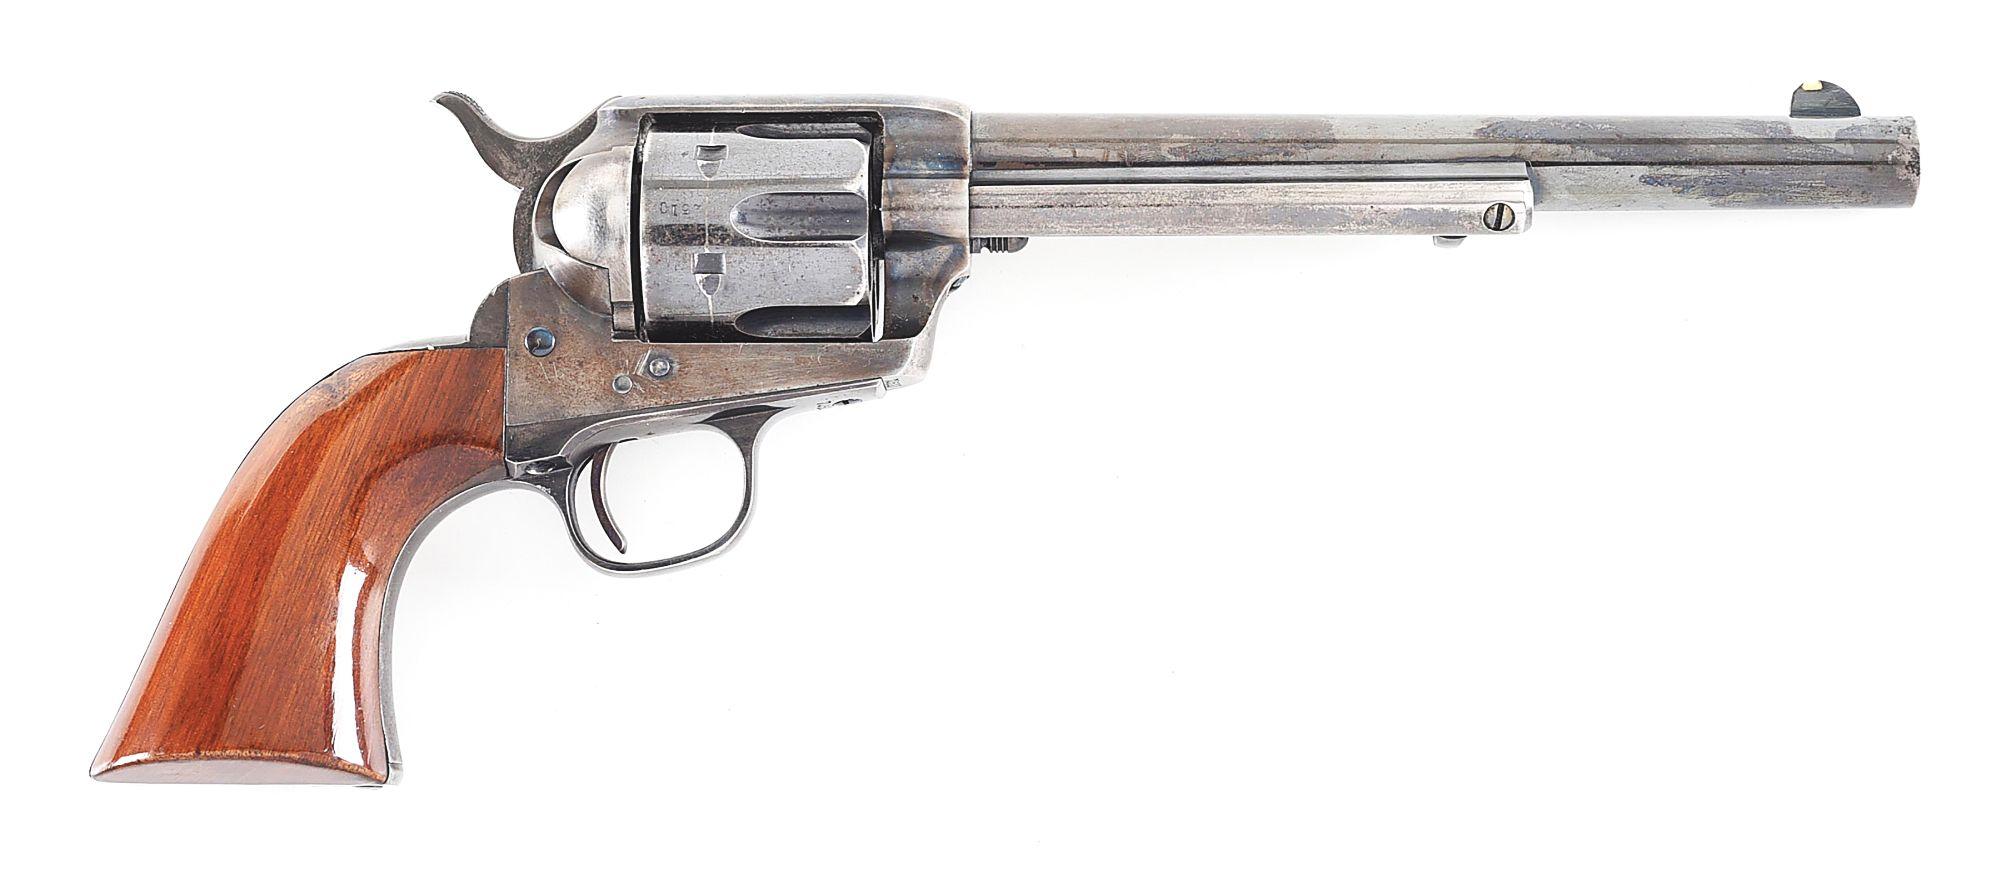 (A) FINE ETCHED PANEL COLT FRONTIER SIX SHOOTER SINGLE ACTION REVOLVER SHIPPED TO WINCHESTER.